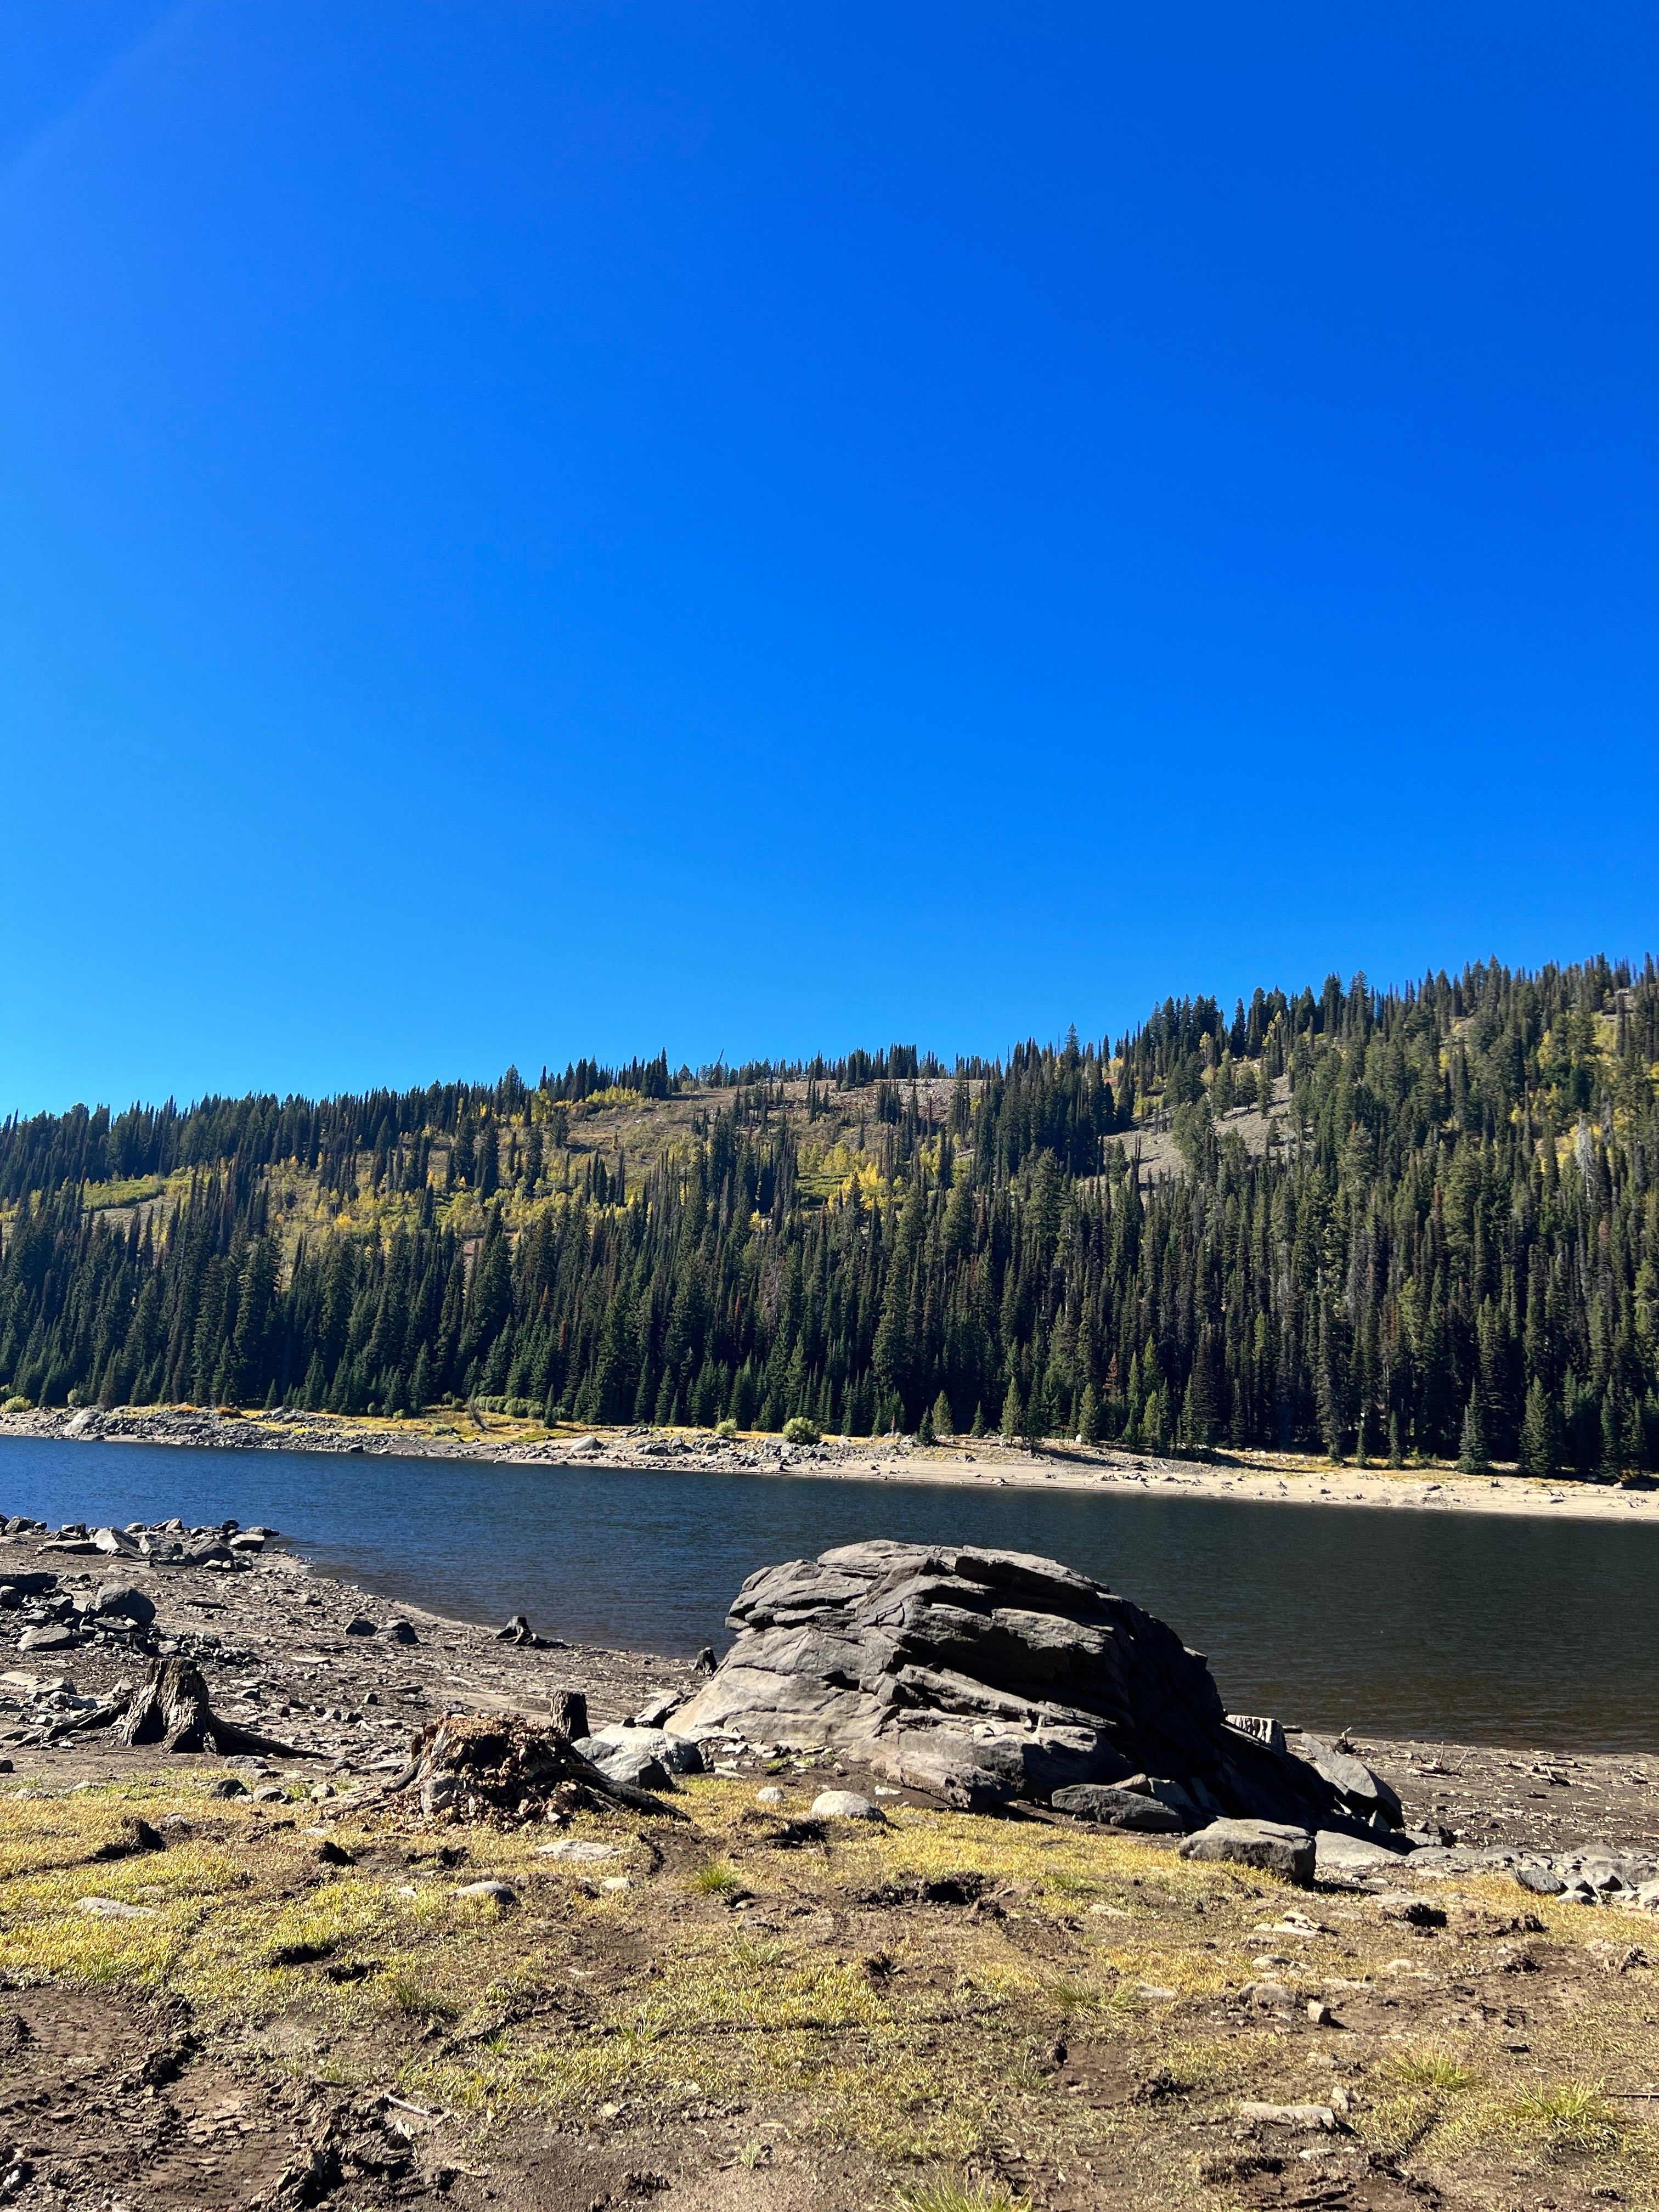 Camper submitted image from Brundage Reservoir Camping Area - 2